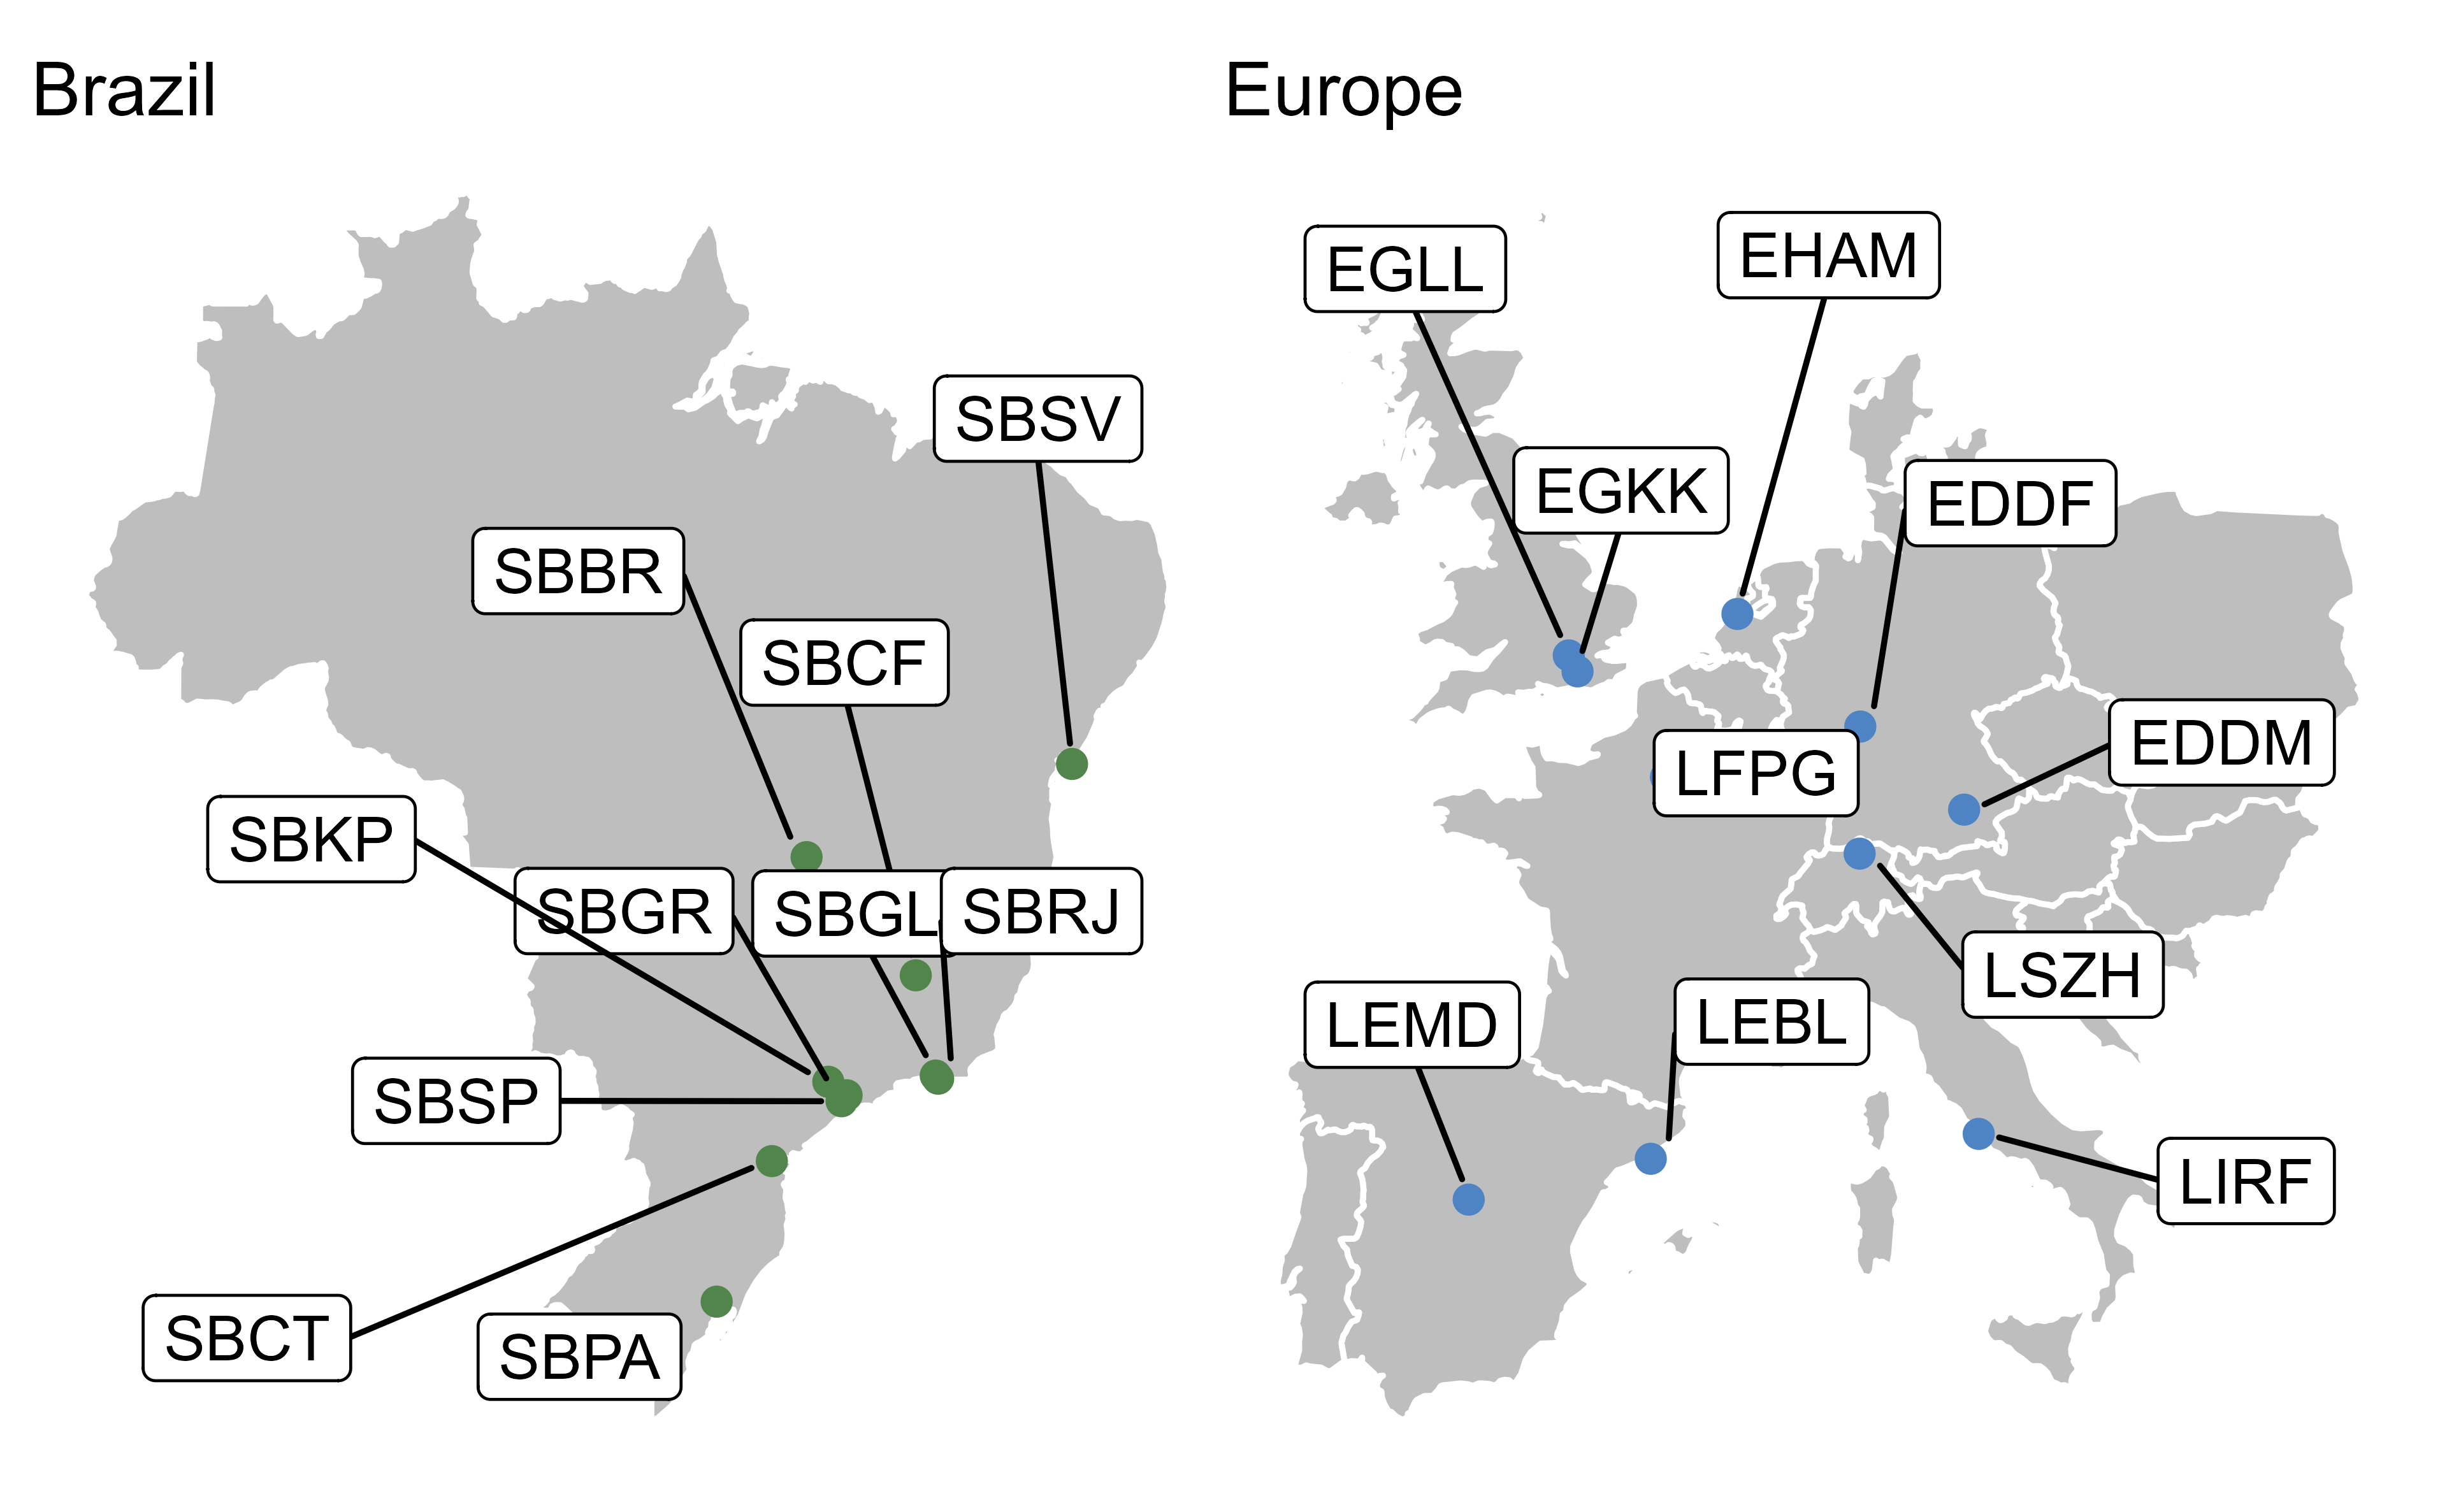 Study airports of Brazil/Europe Comparison